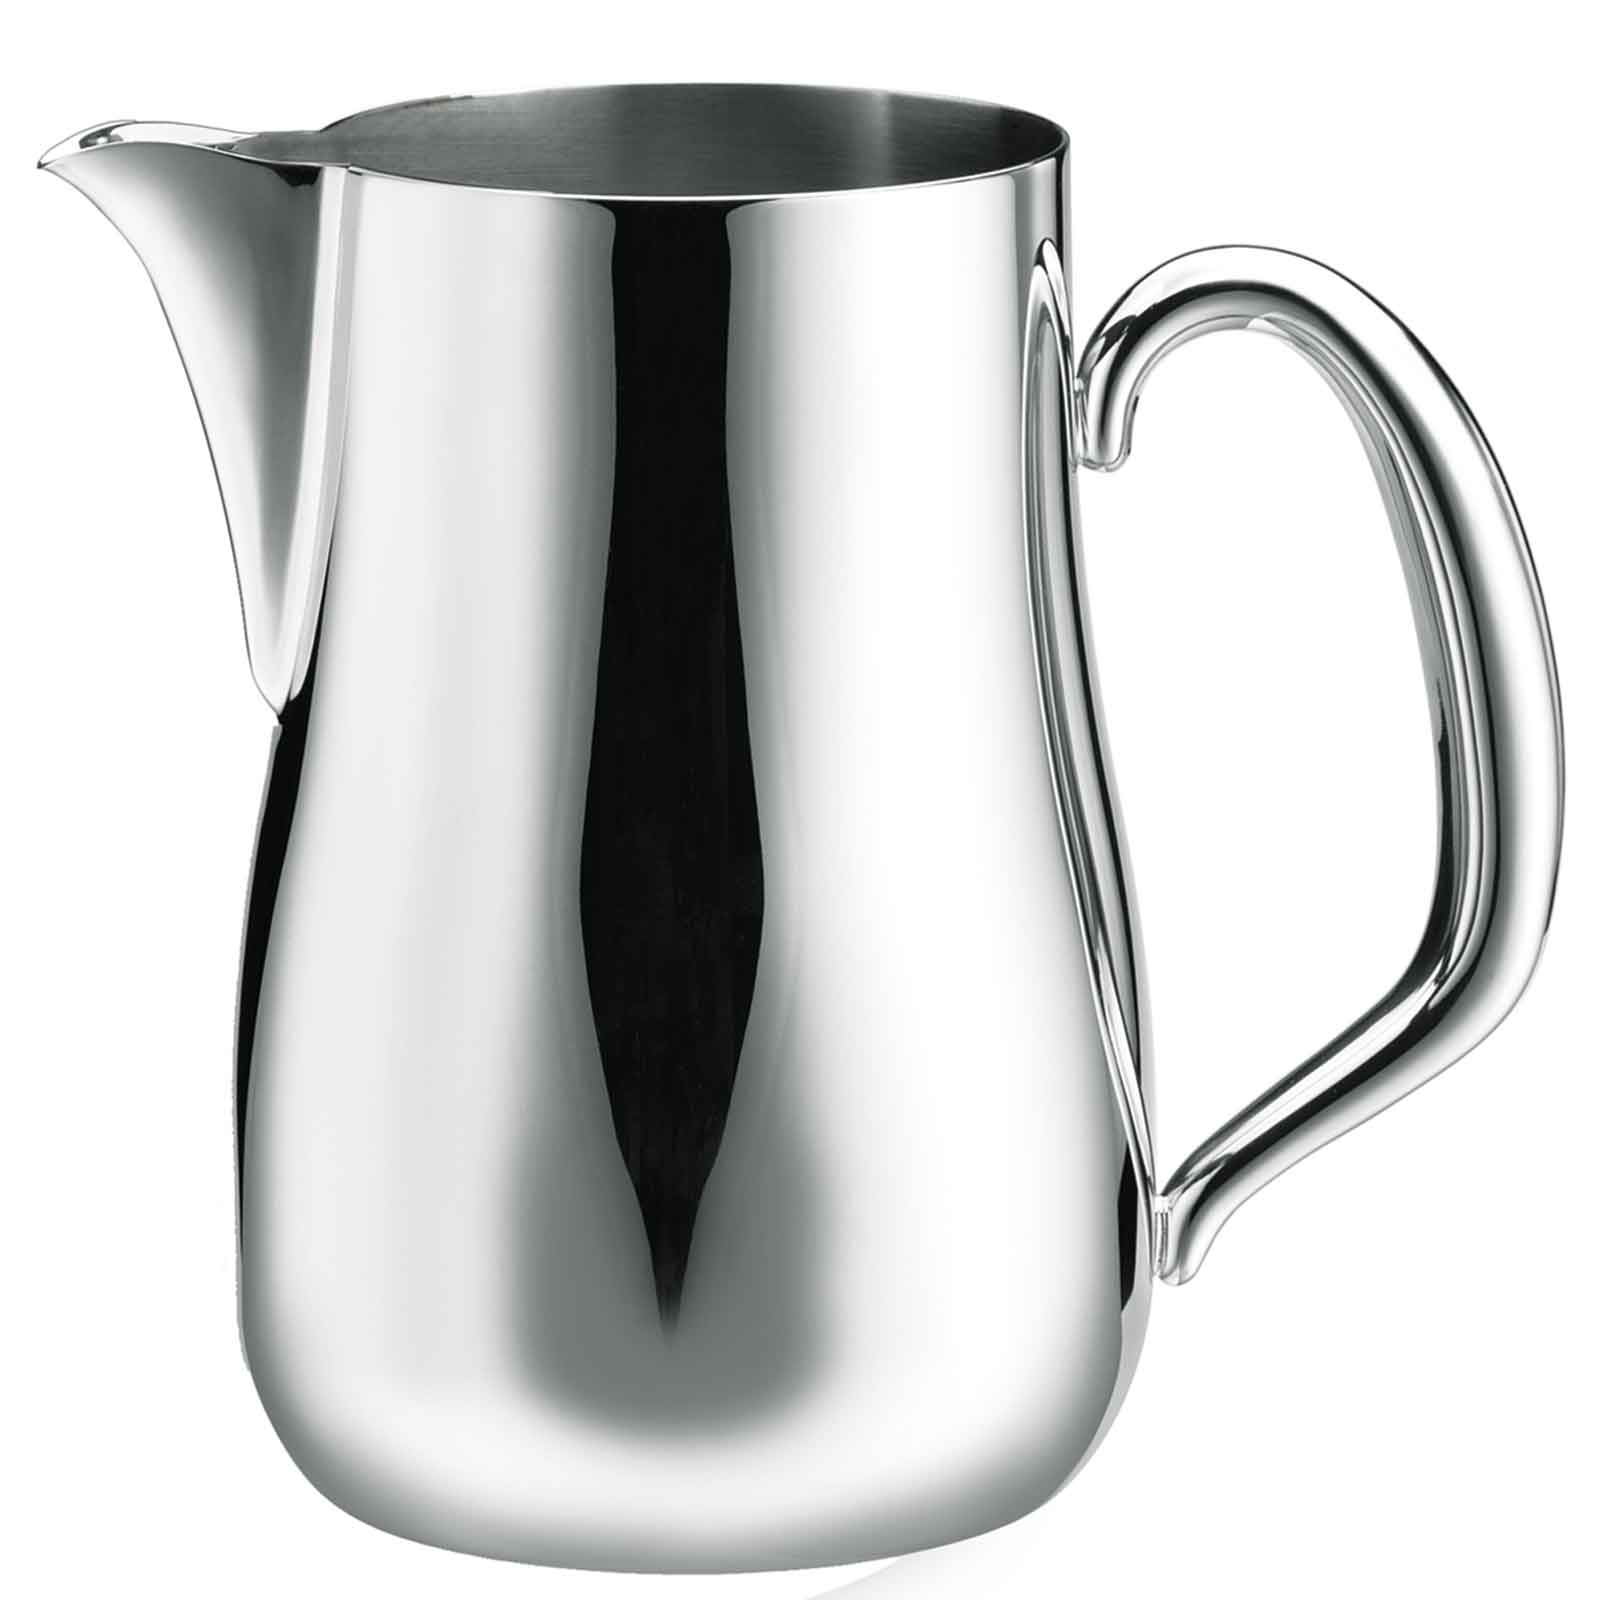 Walco Stainless CX522 Pitcher, Stainless Steel